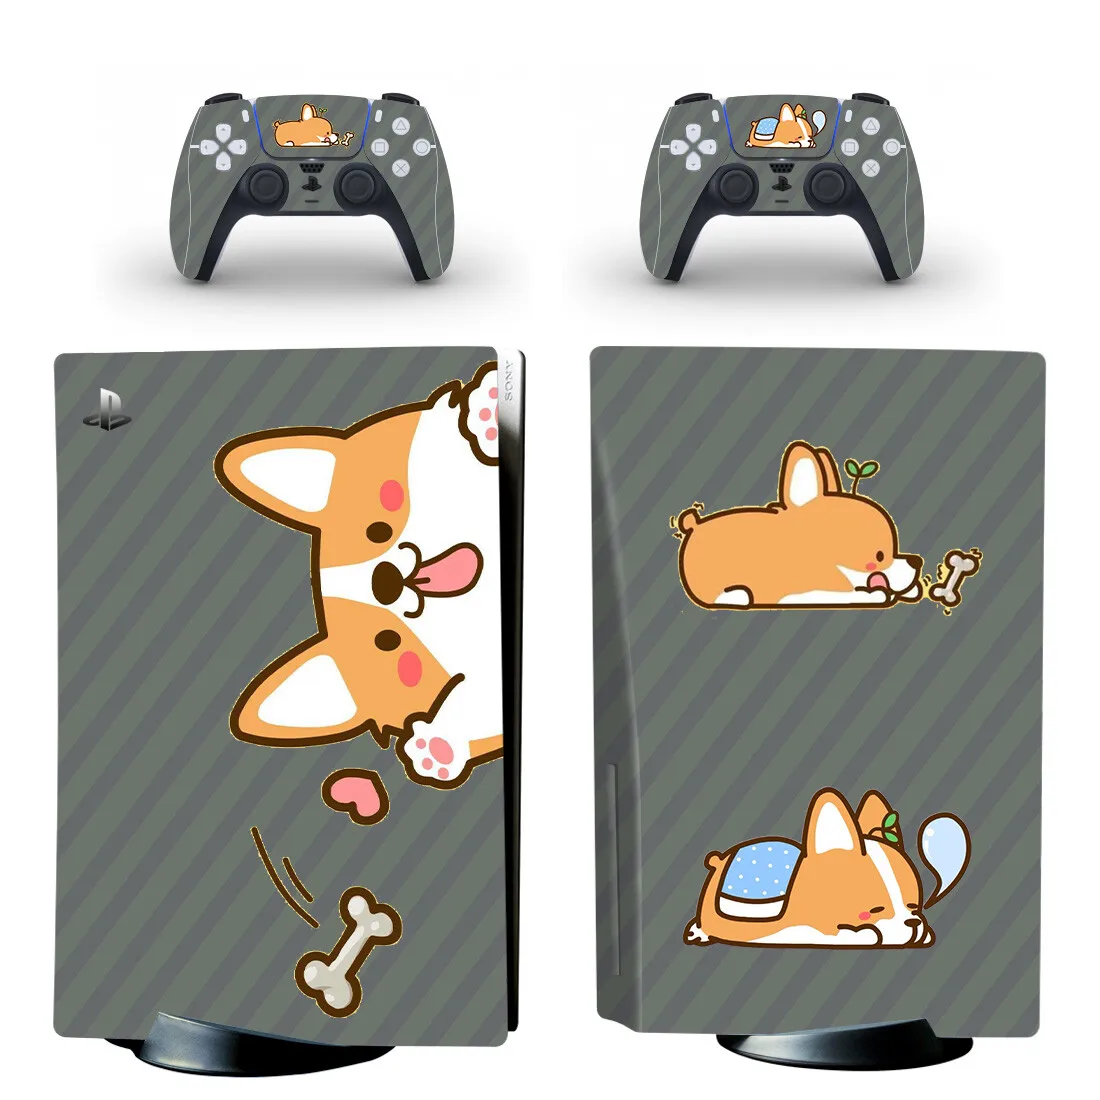 

Corgi Dog PS5 Disc Skin Sticker Cover for Playstation 5 Console & 2 Controllers Decal Vinyl Protective Disk Skins